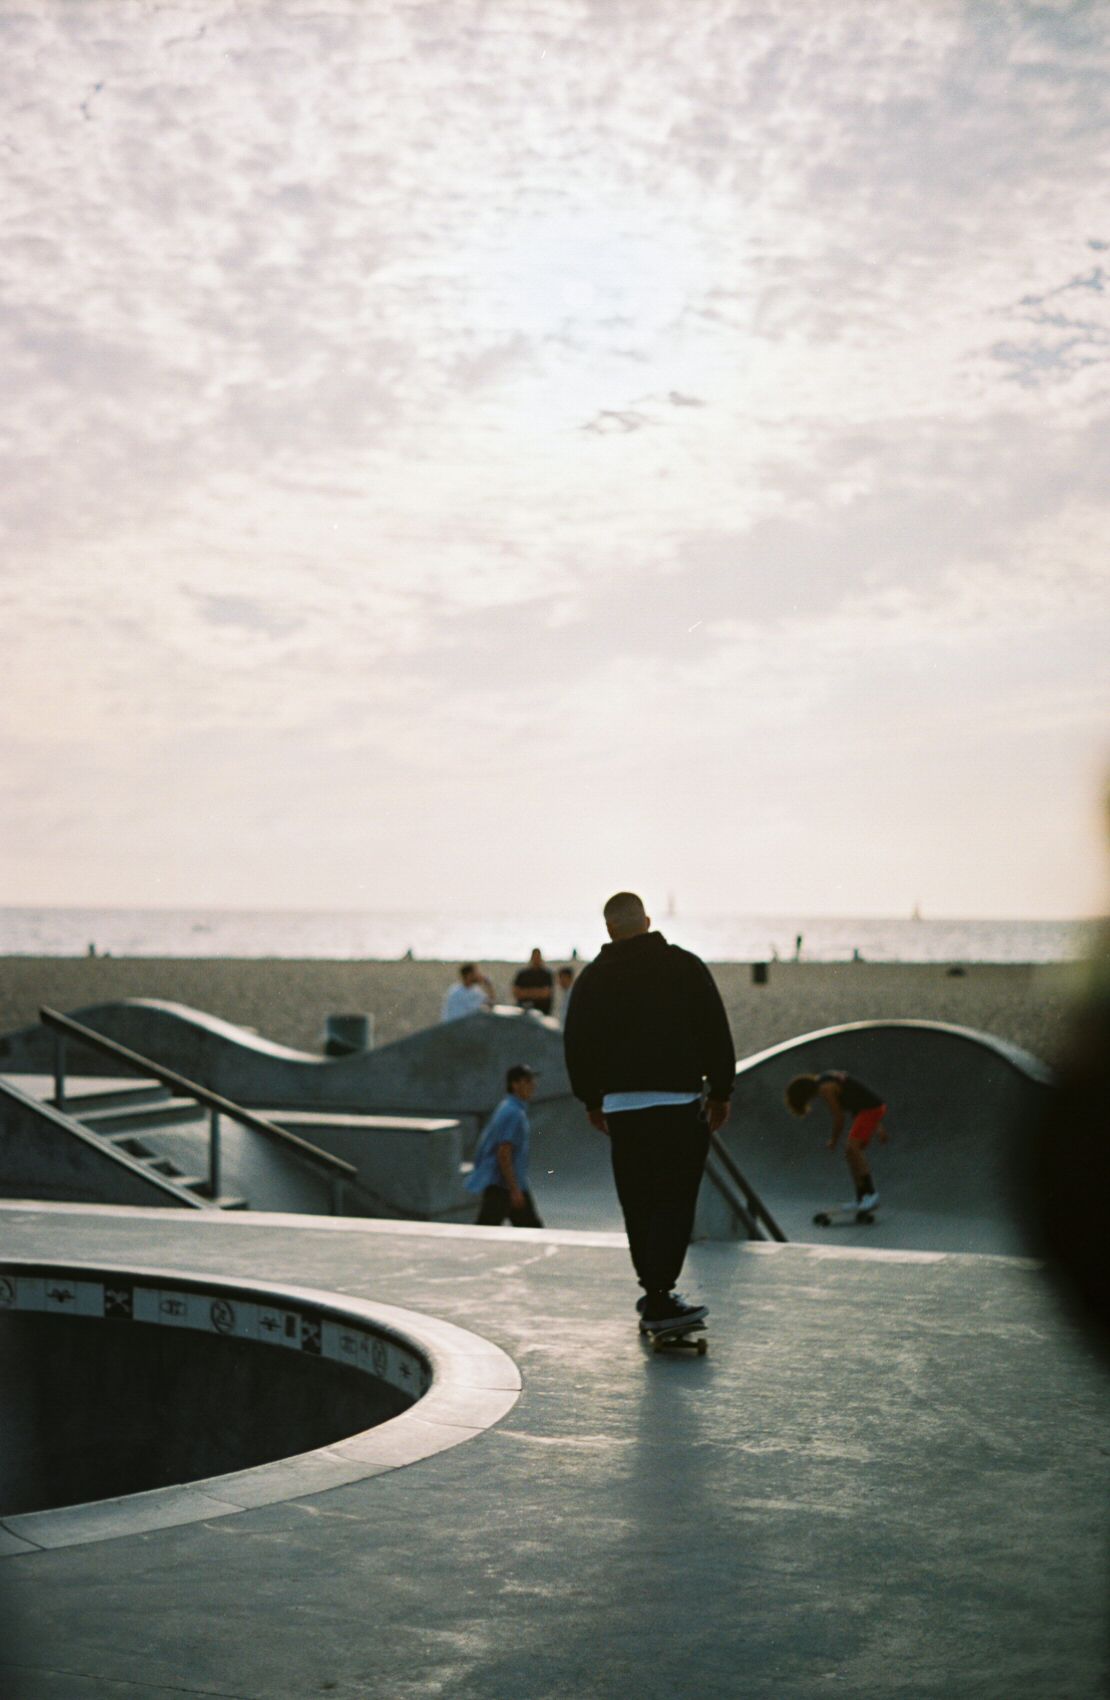 A skateboarder at the skate park at Venice Beach. A sunny sky and sandy beach are in the background.